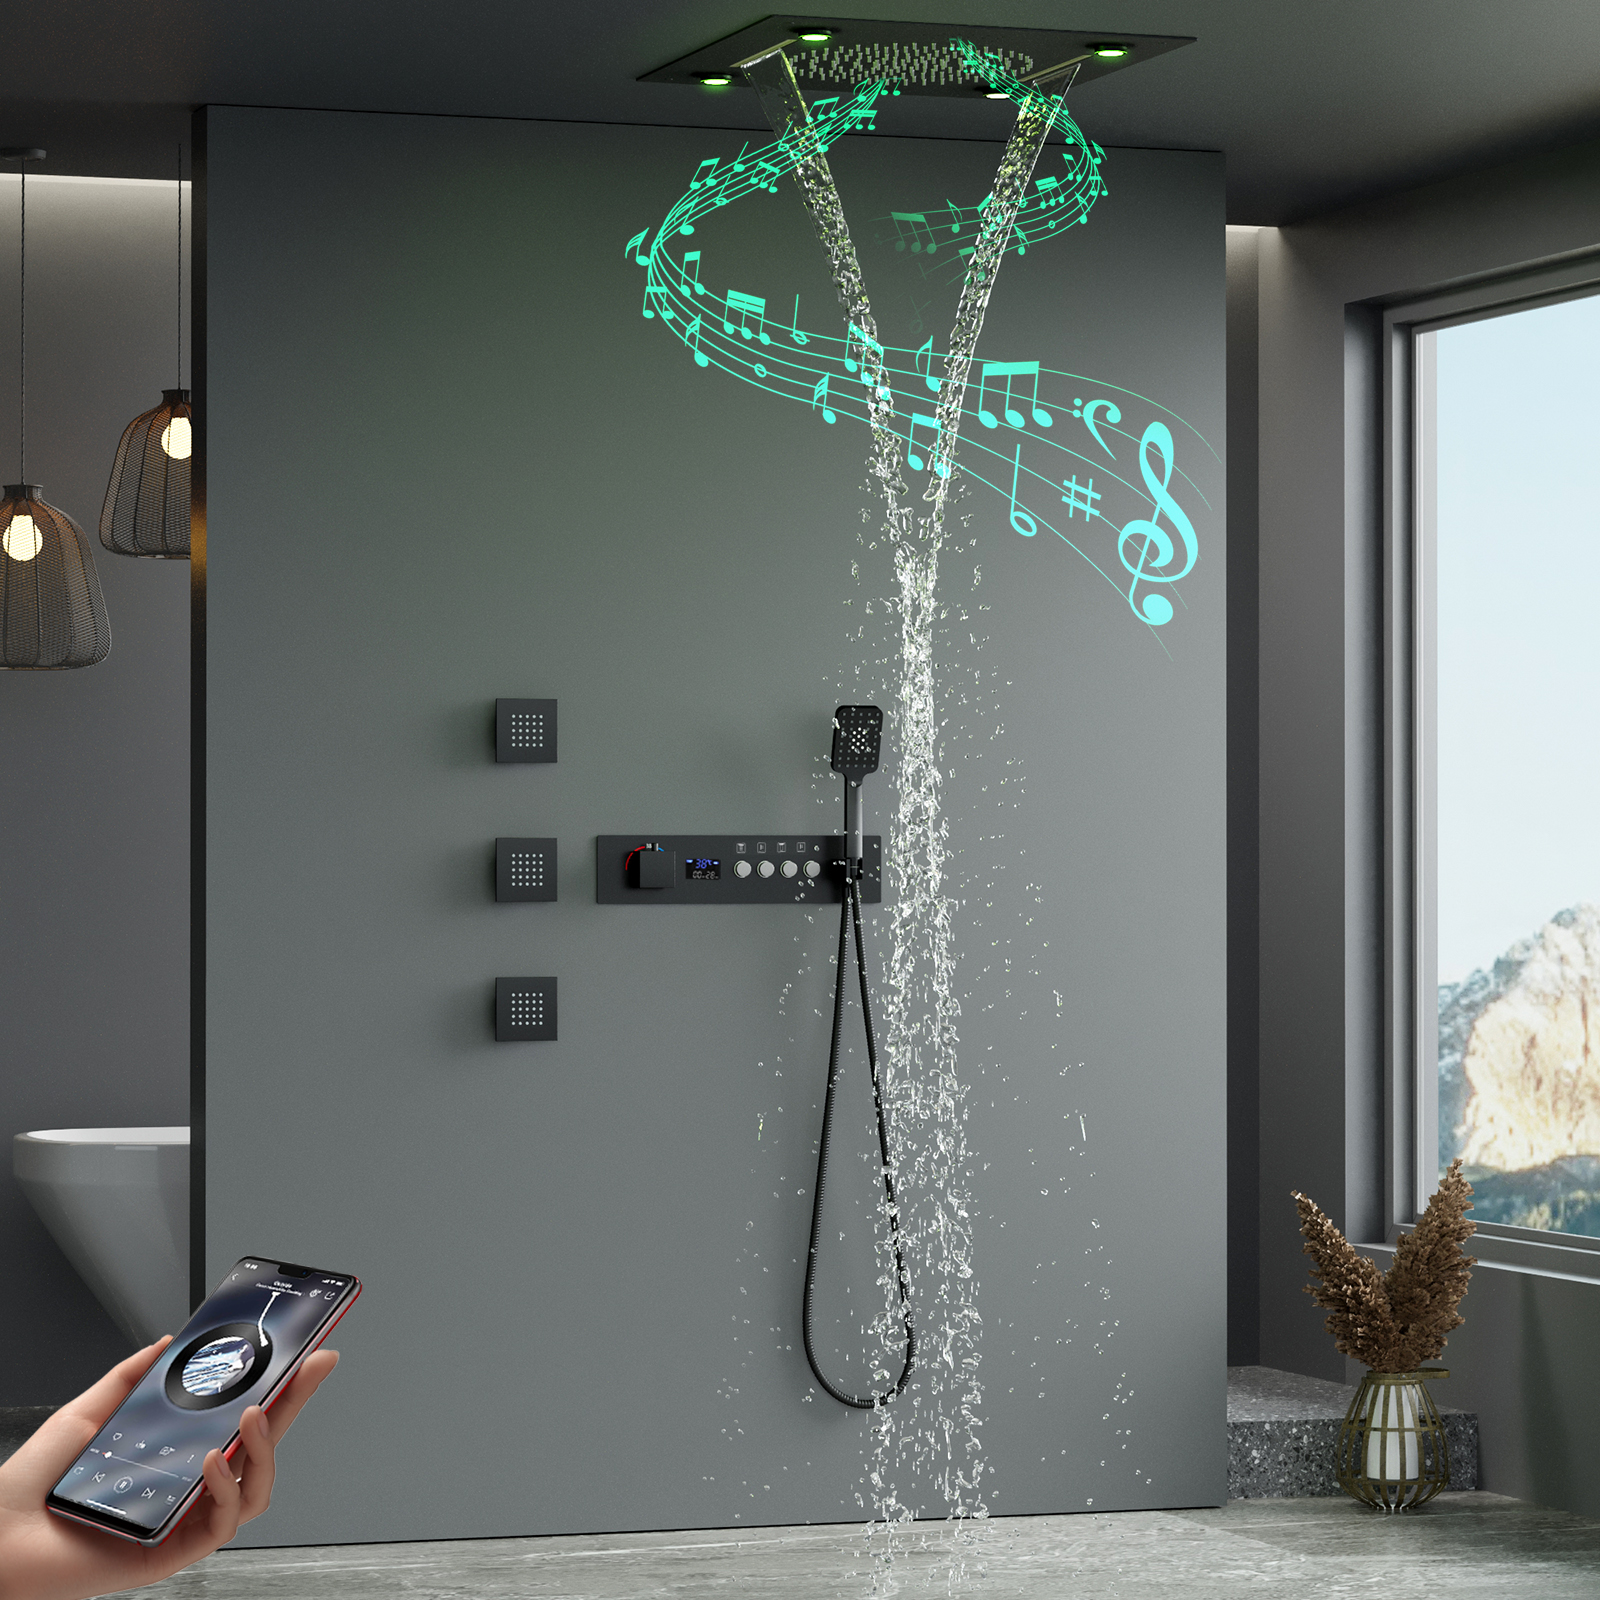 Transform Your Shower Routine with LED Bluetooth Speaker Shower Heads